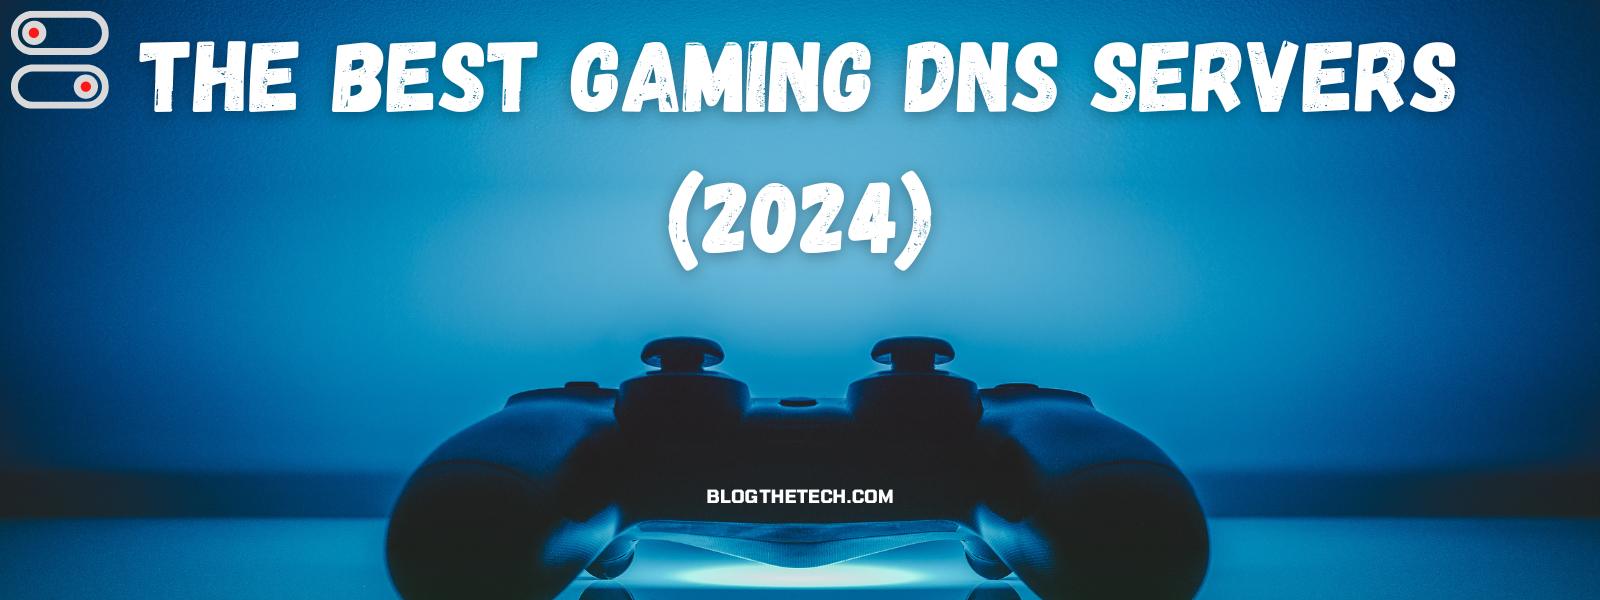 A banner for a blog or article about gaming DNS servers, showing the title 'The Best Gaming DNS Servers (2024)' with a gaming controller in the lower half.